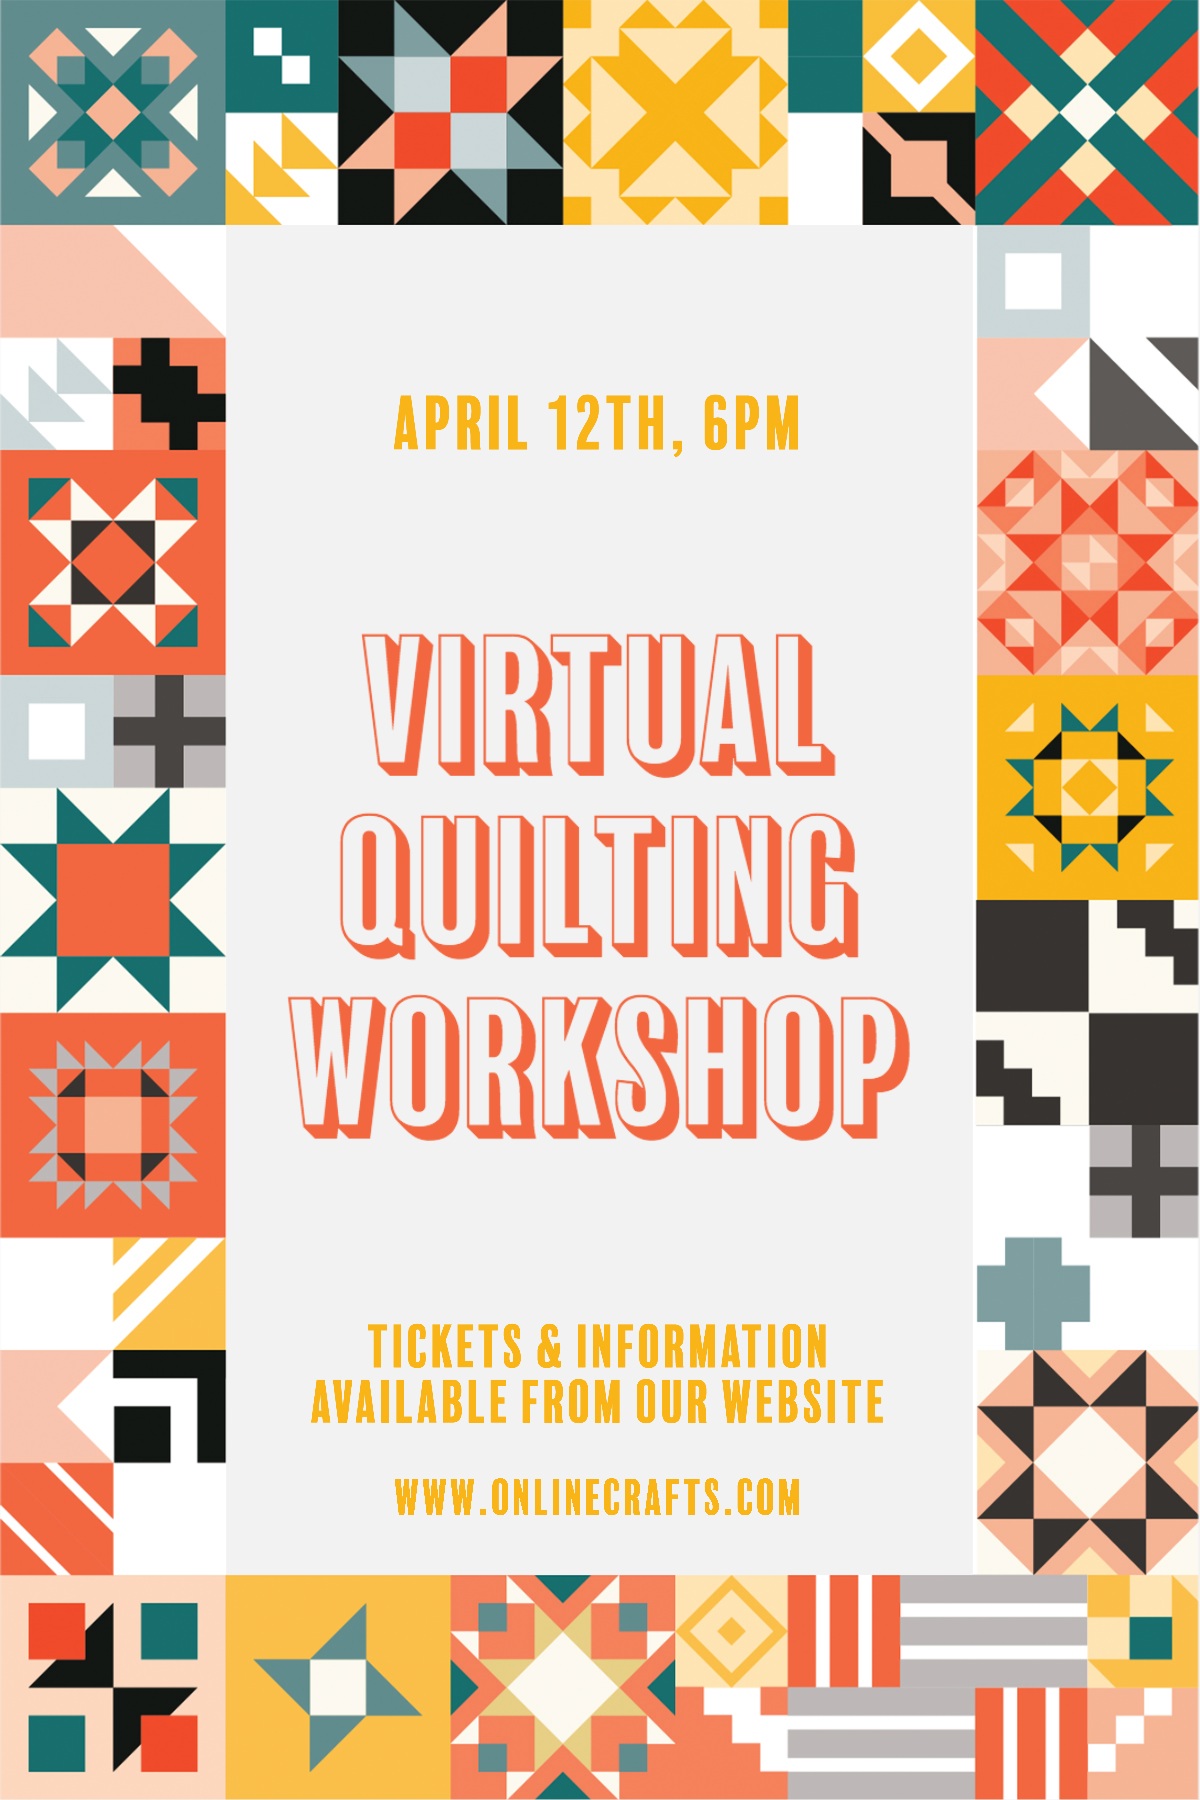 Colorful Quilting Workshop Pinterest Post Virtual Quilting Workshop April 12th, 6pm Tickets & information available from our website www.onlinecrafts.com